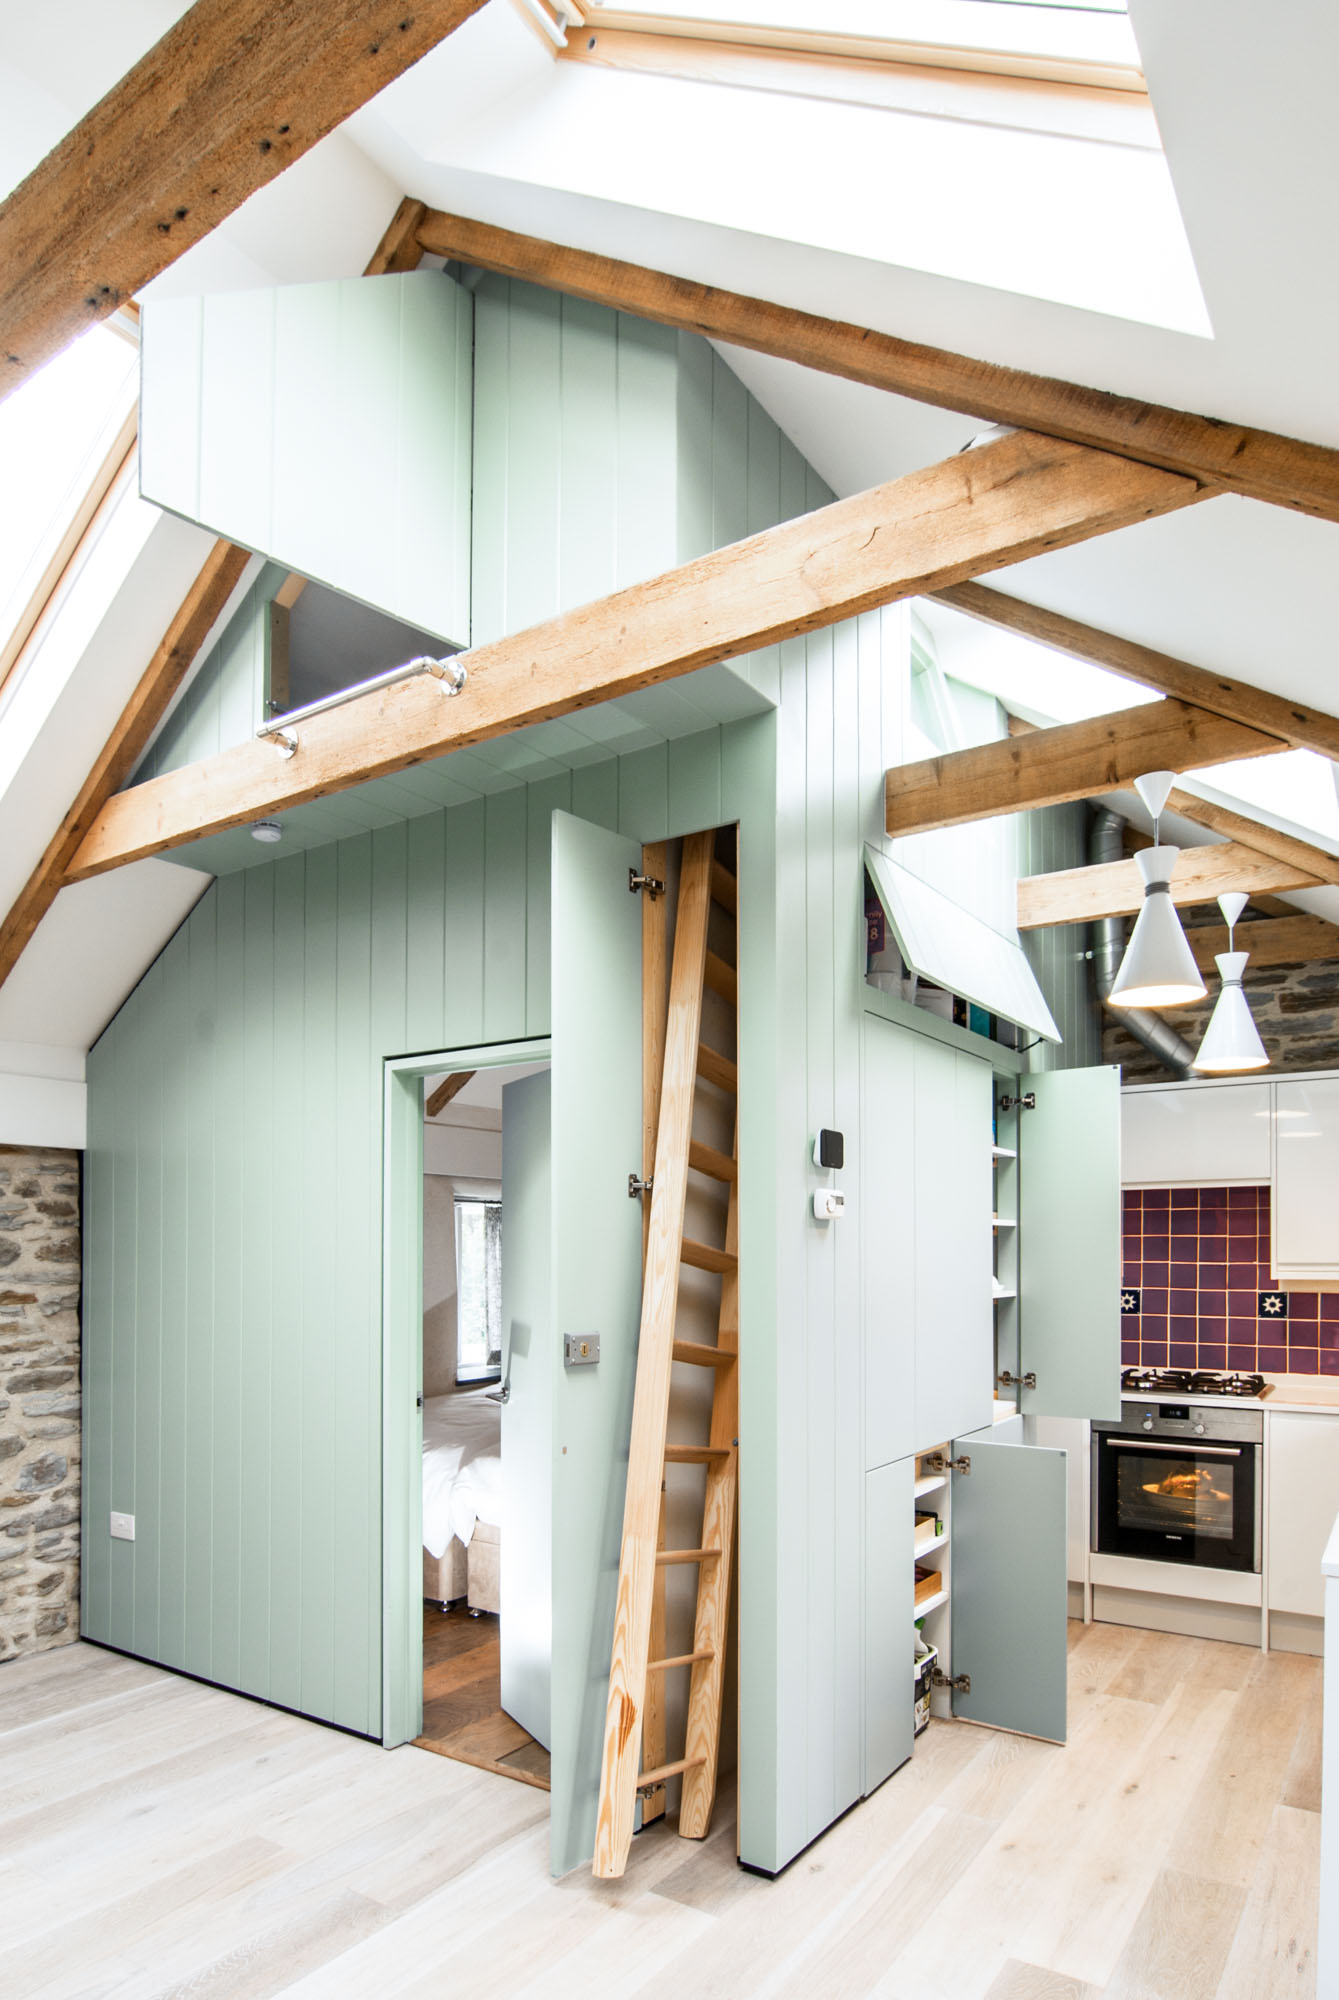 Exposed beams and hidden ladder within the concealed room structure.